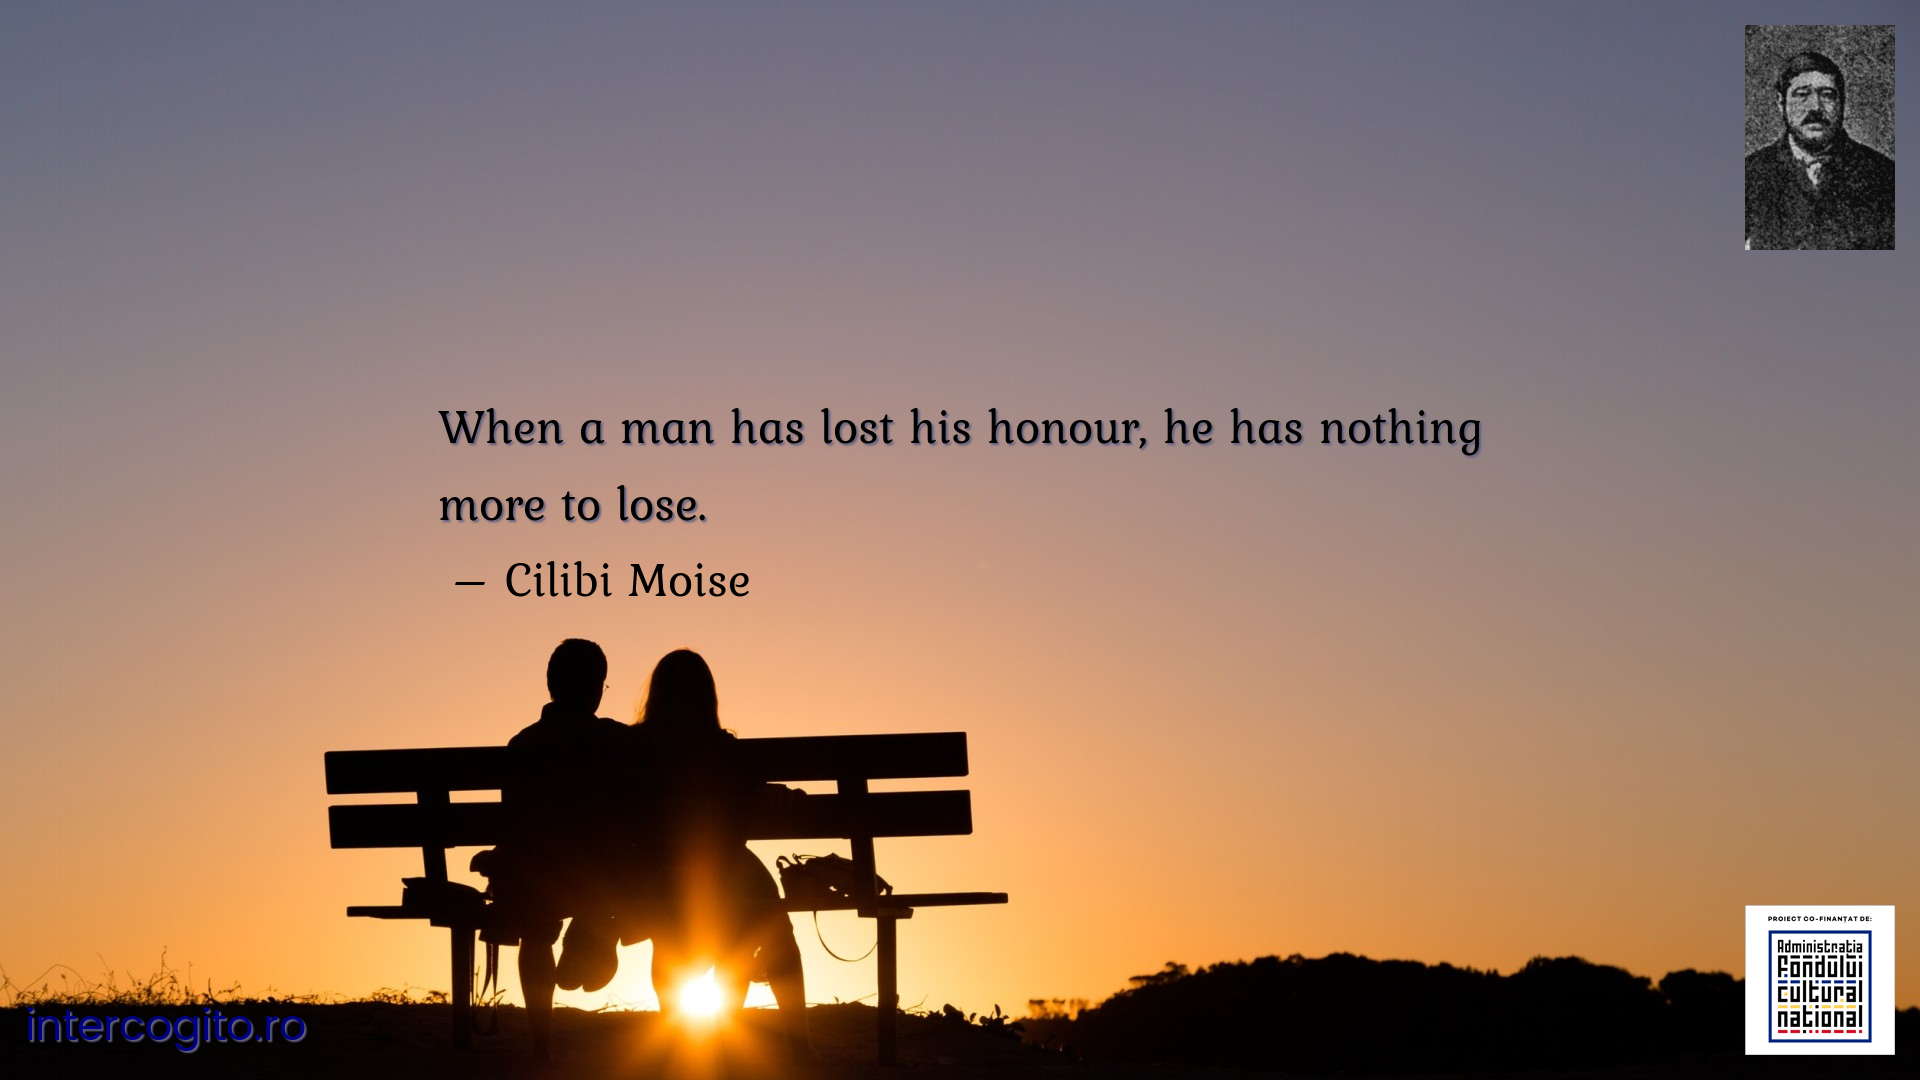 When a man has lost his honour, he has nothing more to lose.